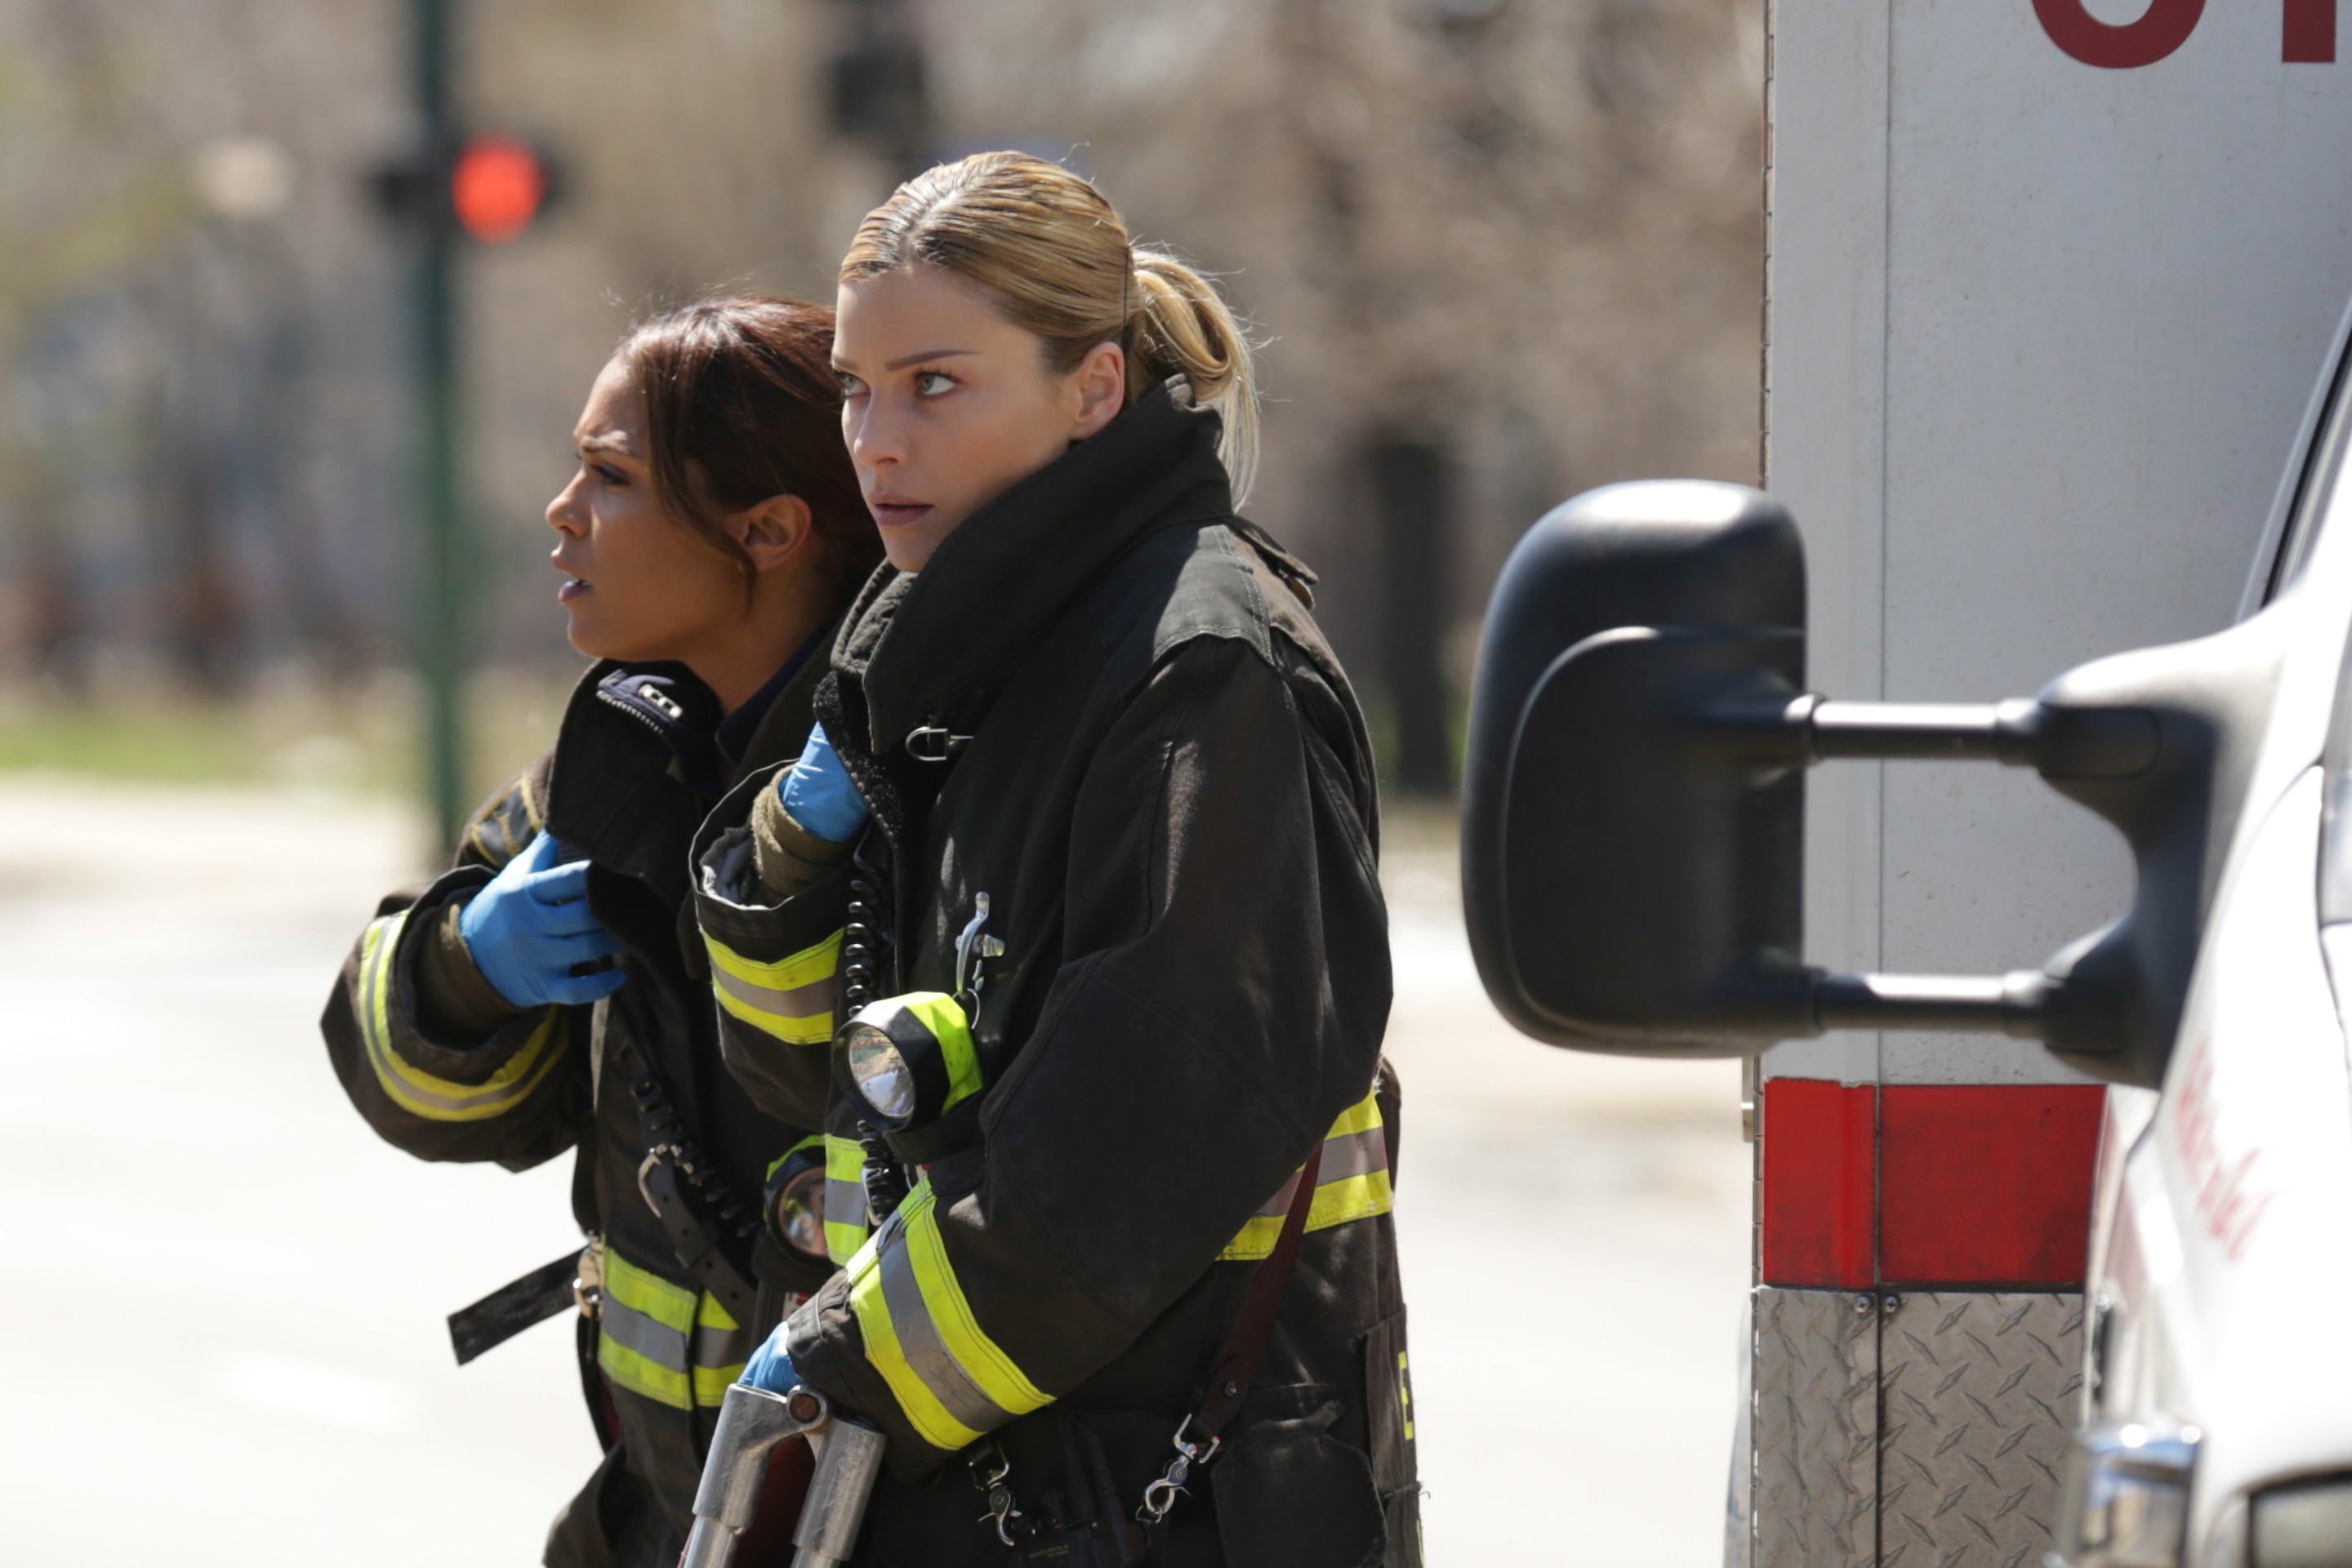 tuaserie #chicagofire #chicagopd #nbc #chicago #leslieshay